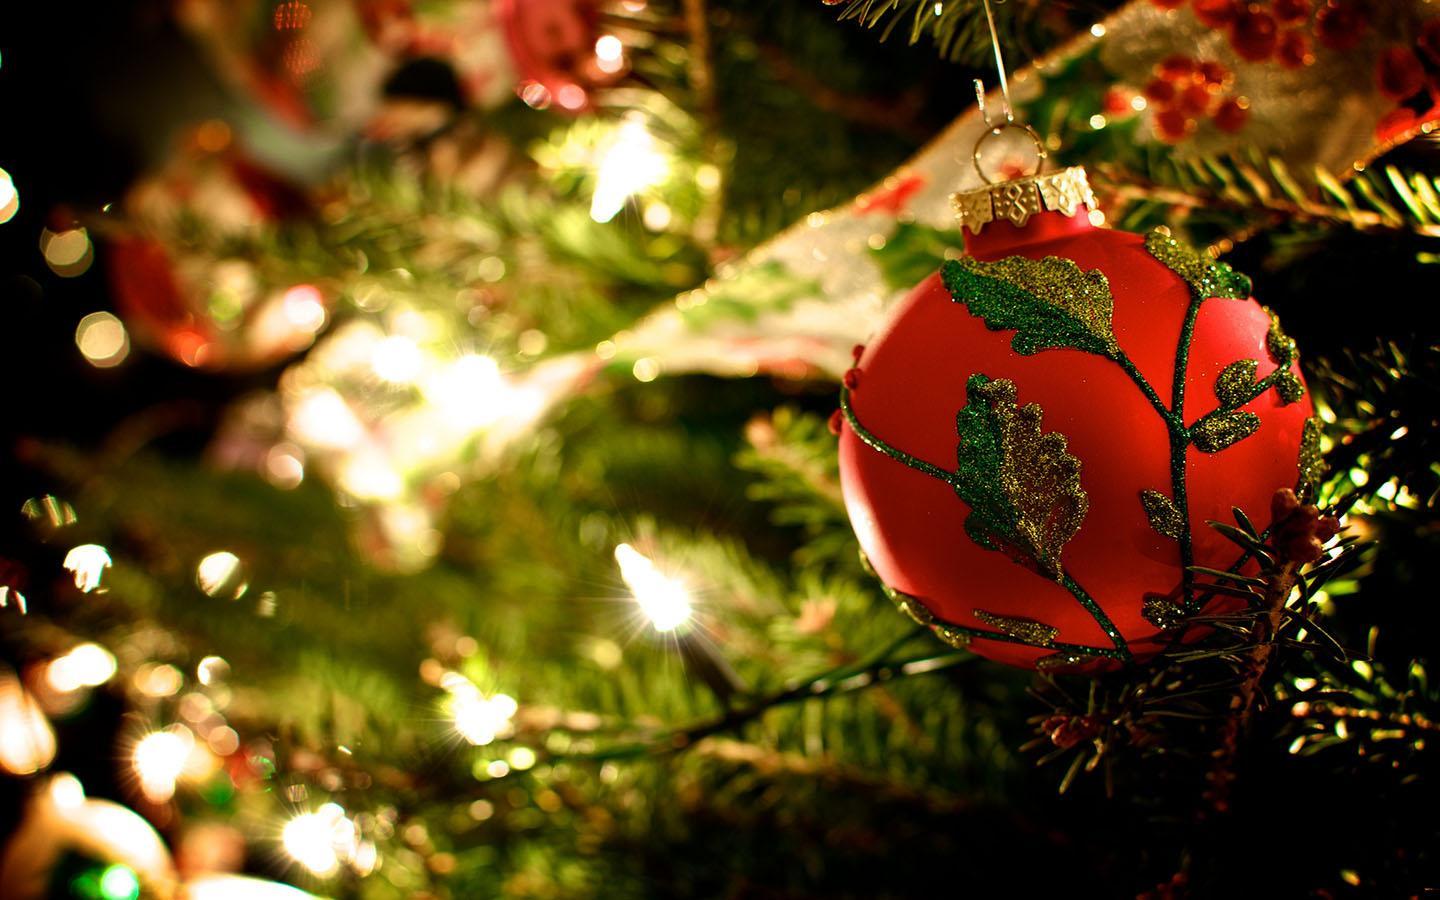 Cool Christmas Wallpaper to Decorate your Desktops, iPhone